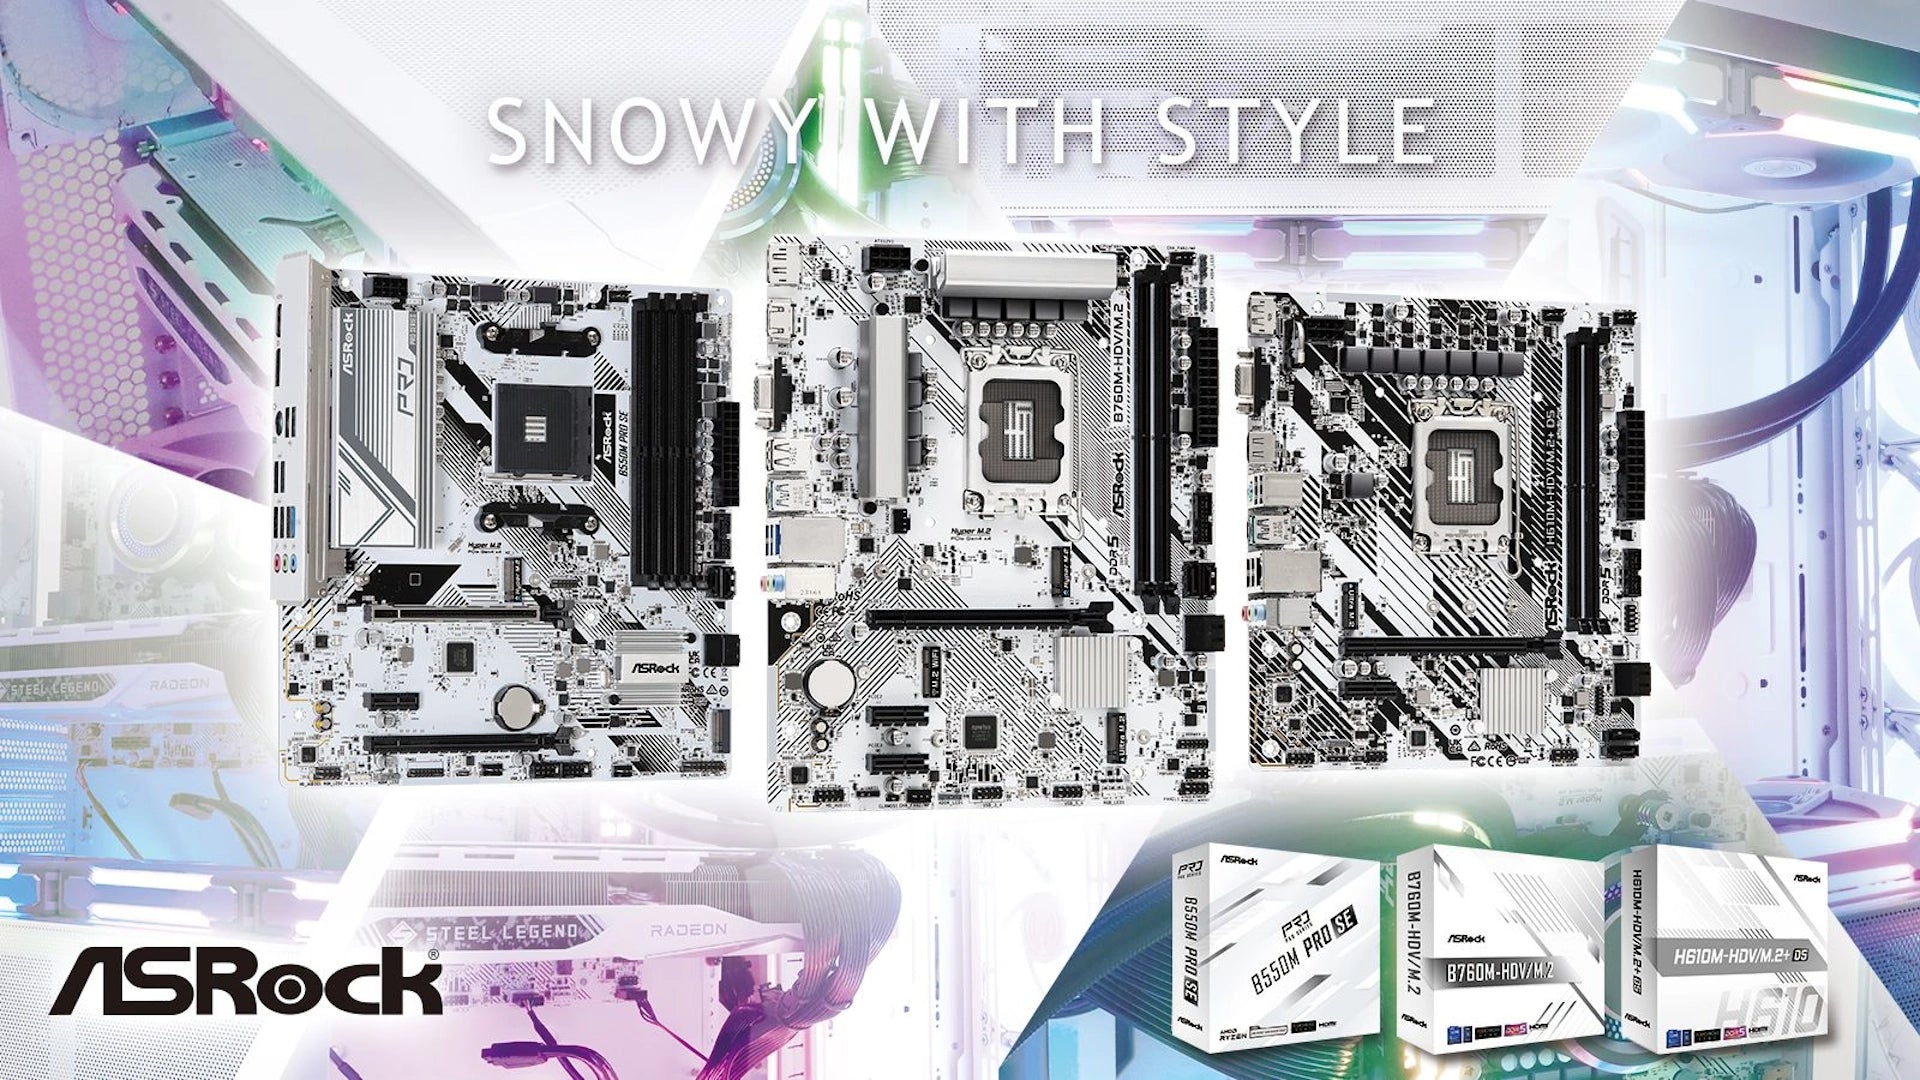 Snowy with Style! ASRock Launches All-White Motherboards - Vektra Computers LLC